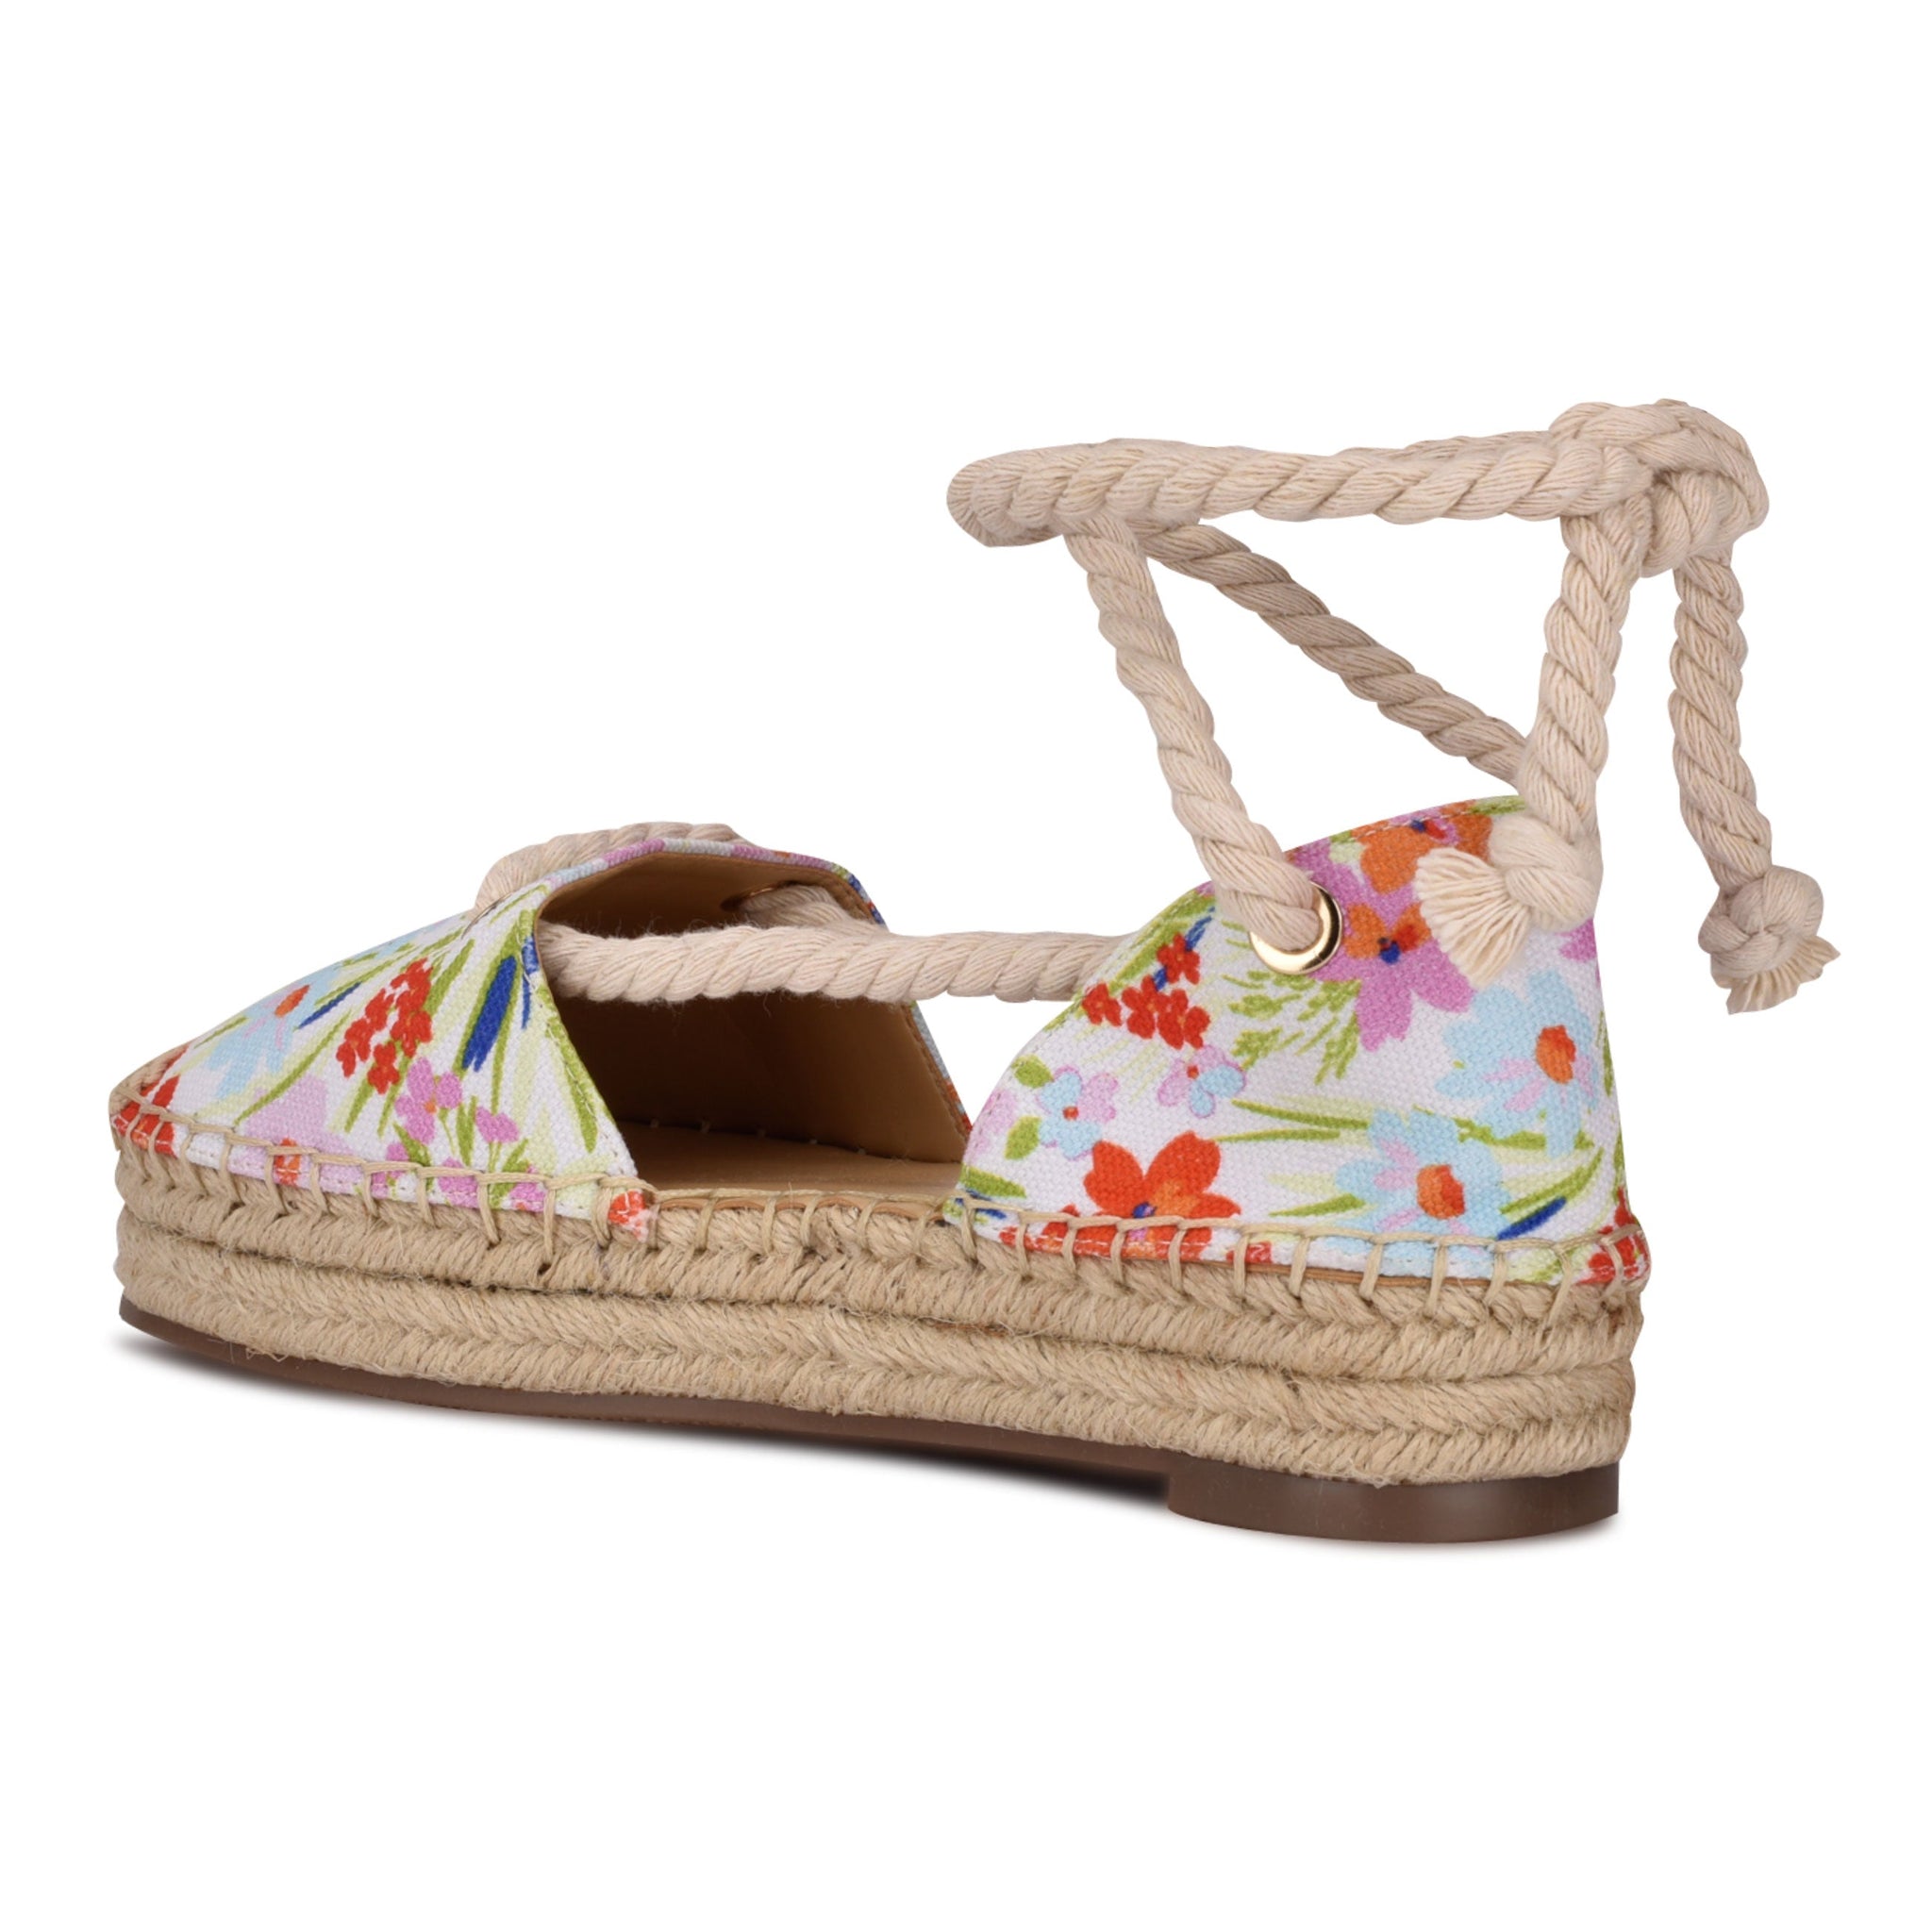 Ninewest- Meaks Ankle Wrap Espadrille Flats (WHITE FLORAL PRINT)